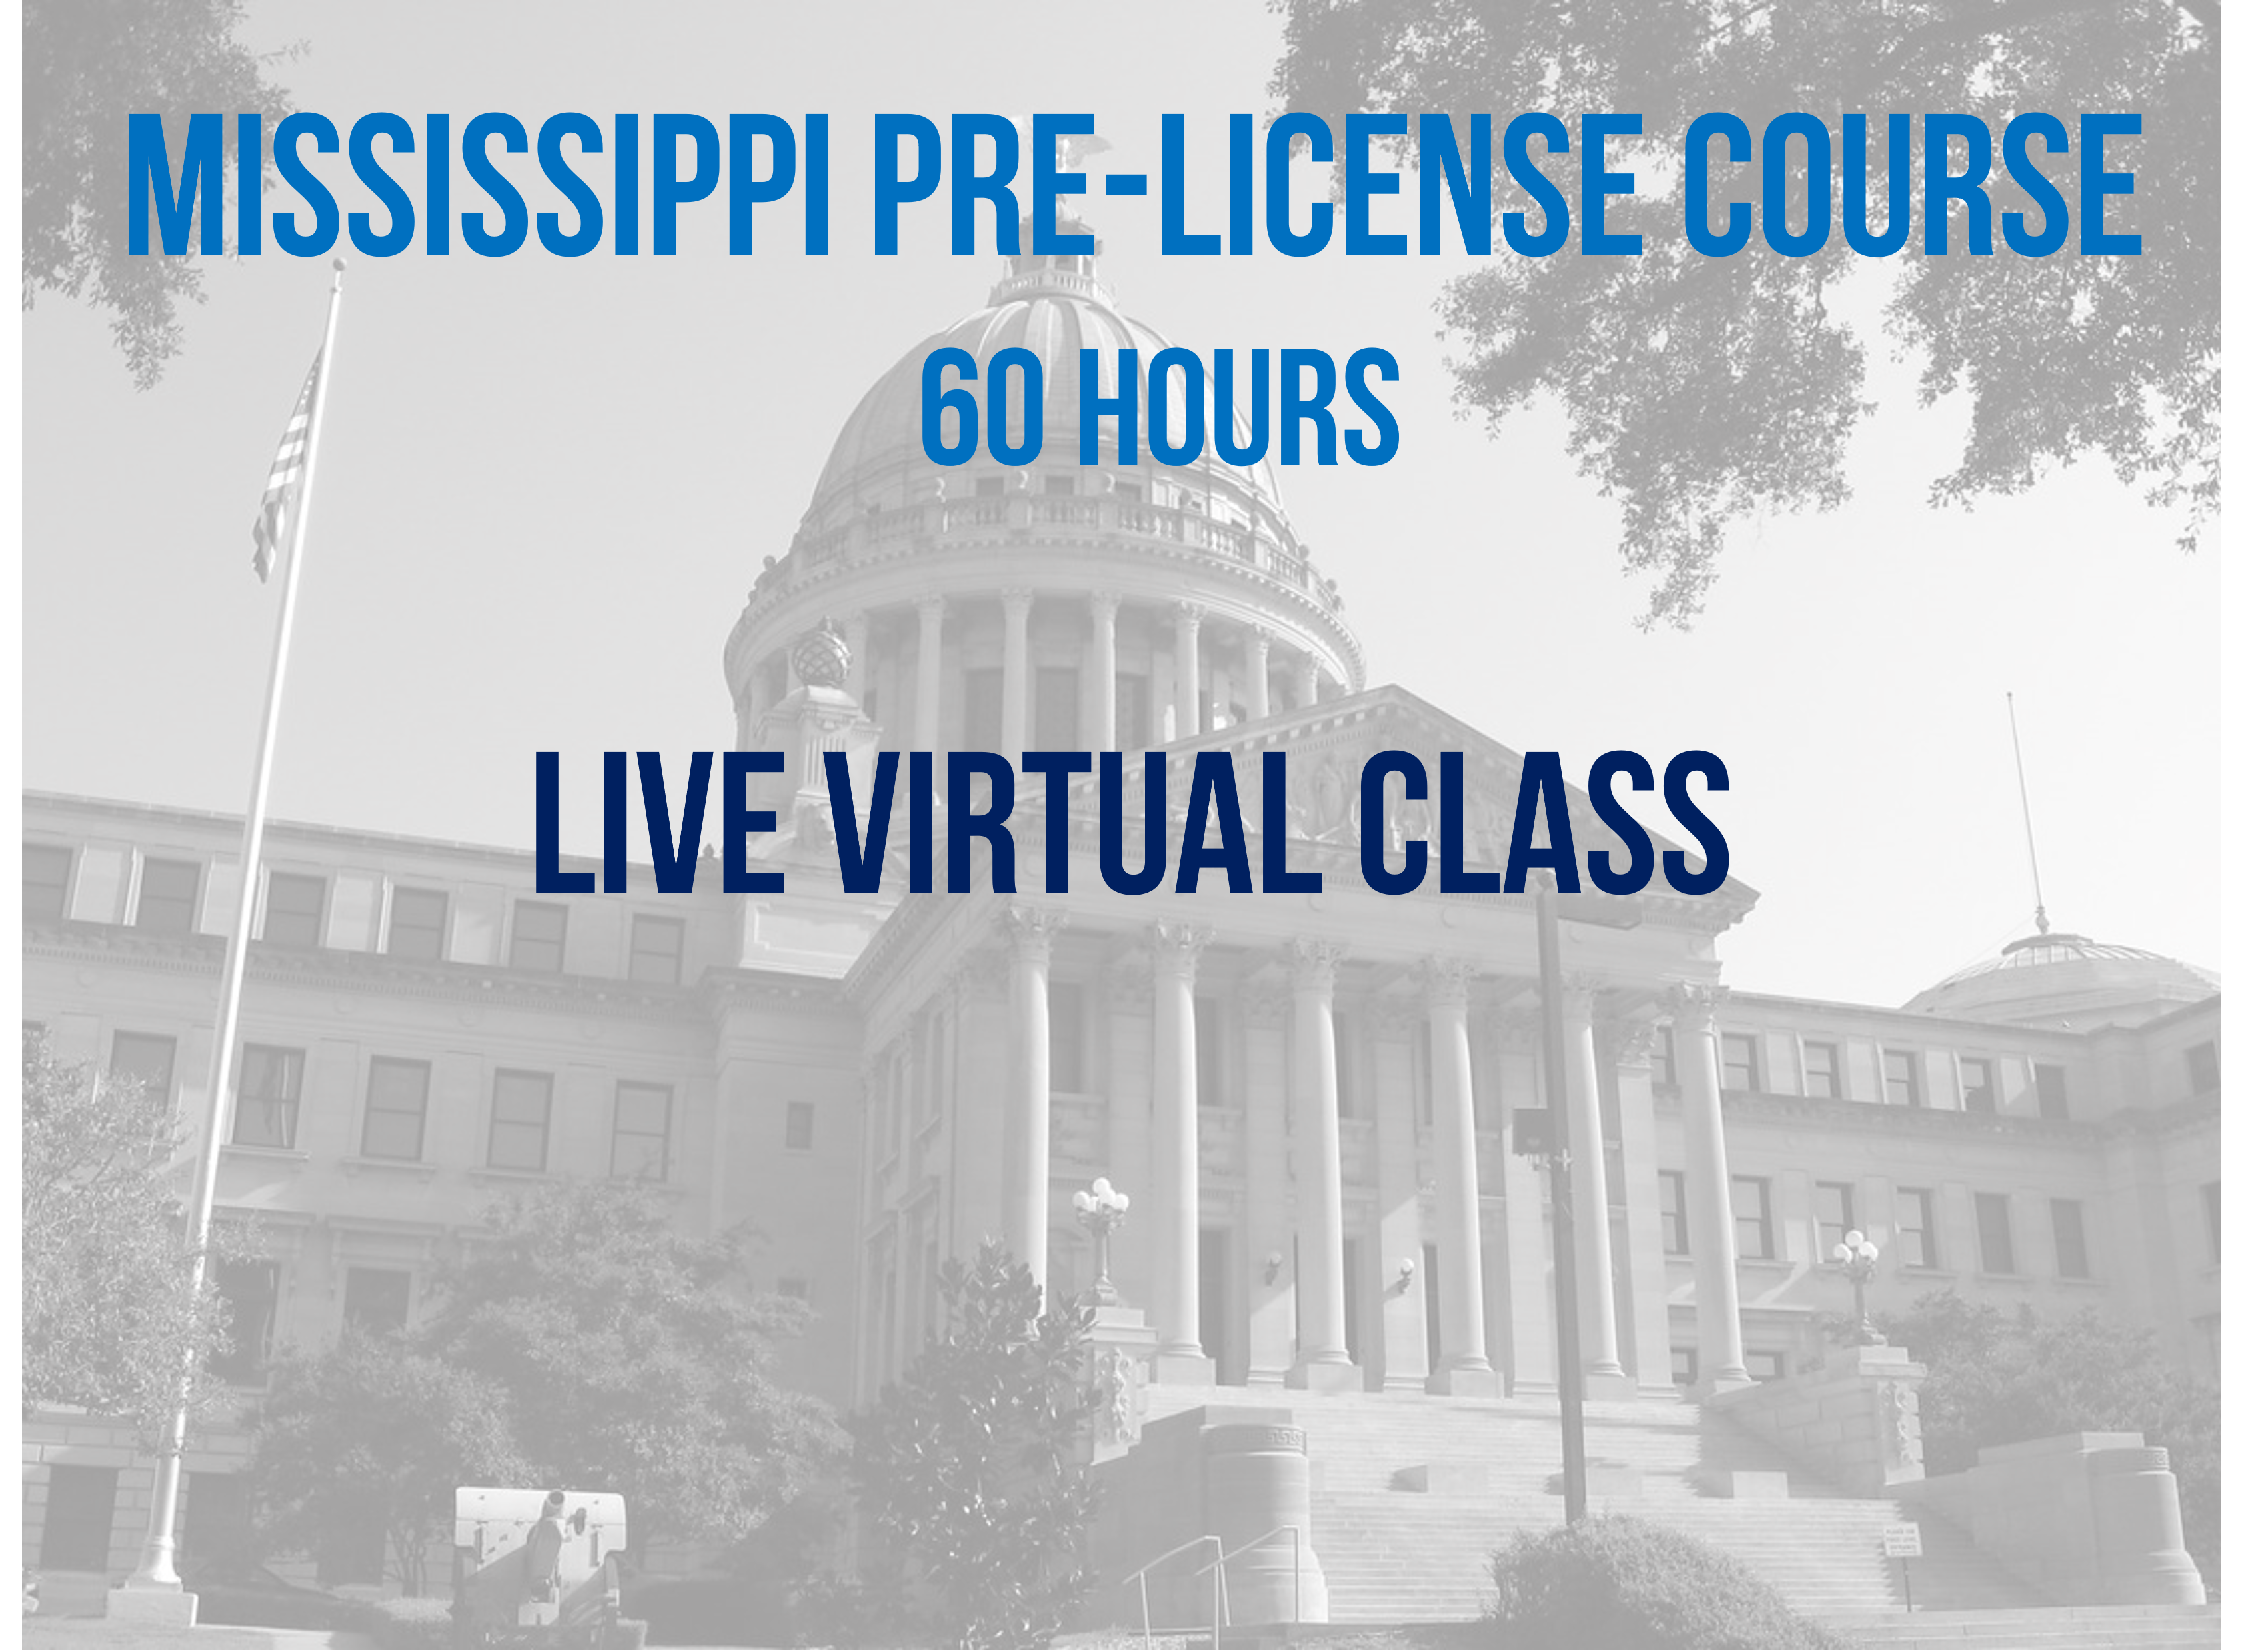 MS Pre-License Course - 60 Hours